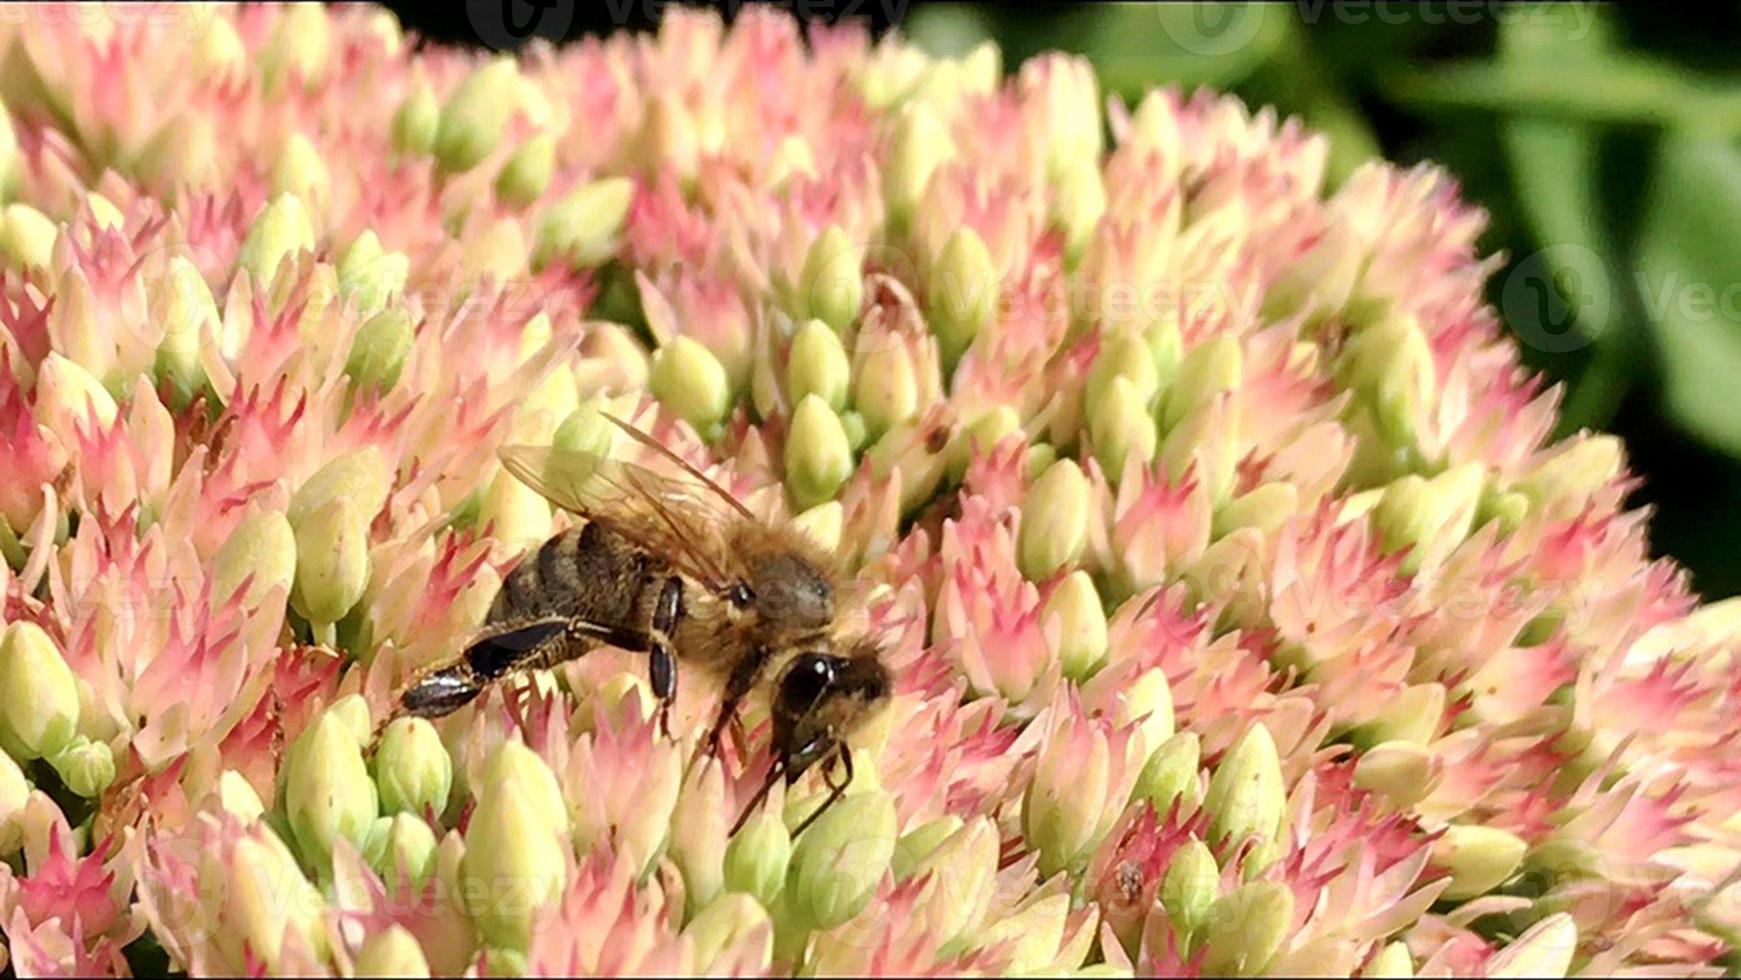 Winged bee slowly flies to the plant, collect nectar for honey on private apiary from flower photo